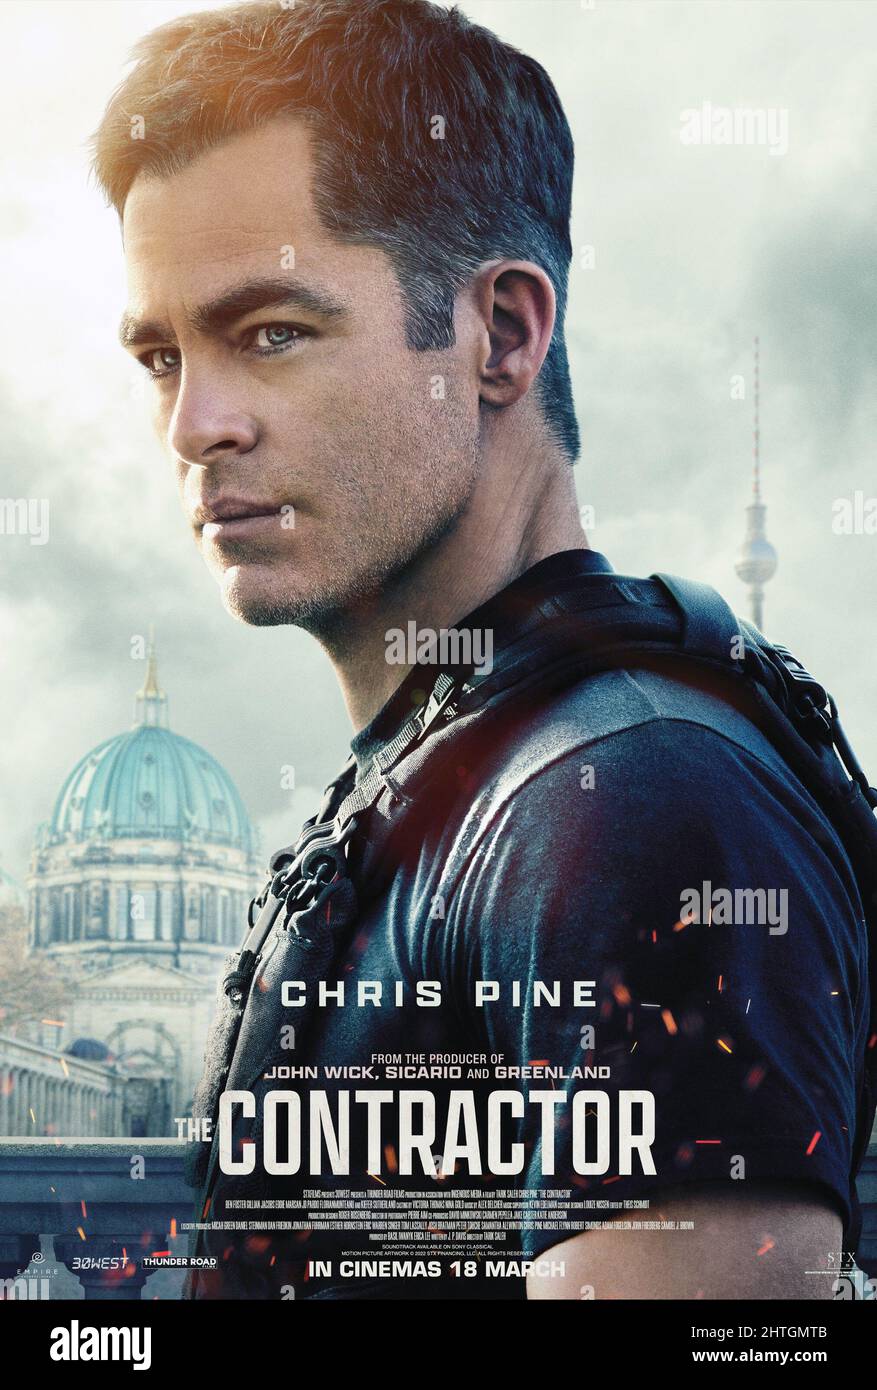 The contractor chris pine High Resolution Stock Photography and Images